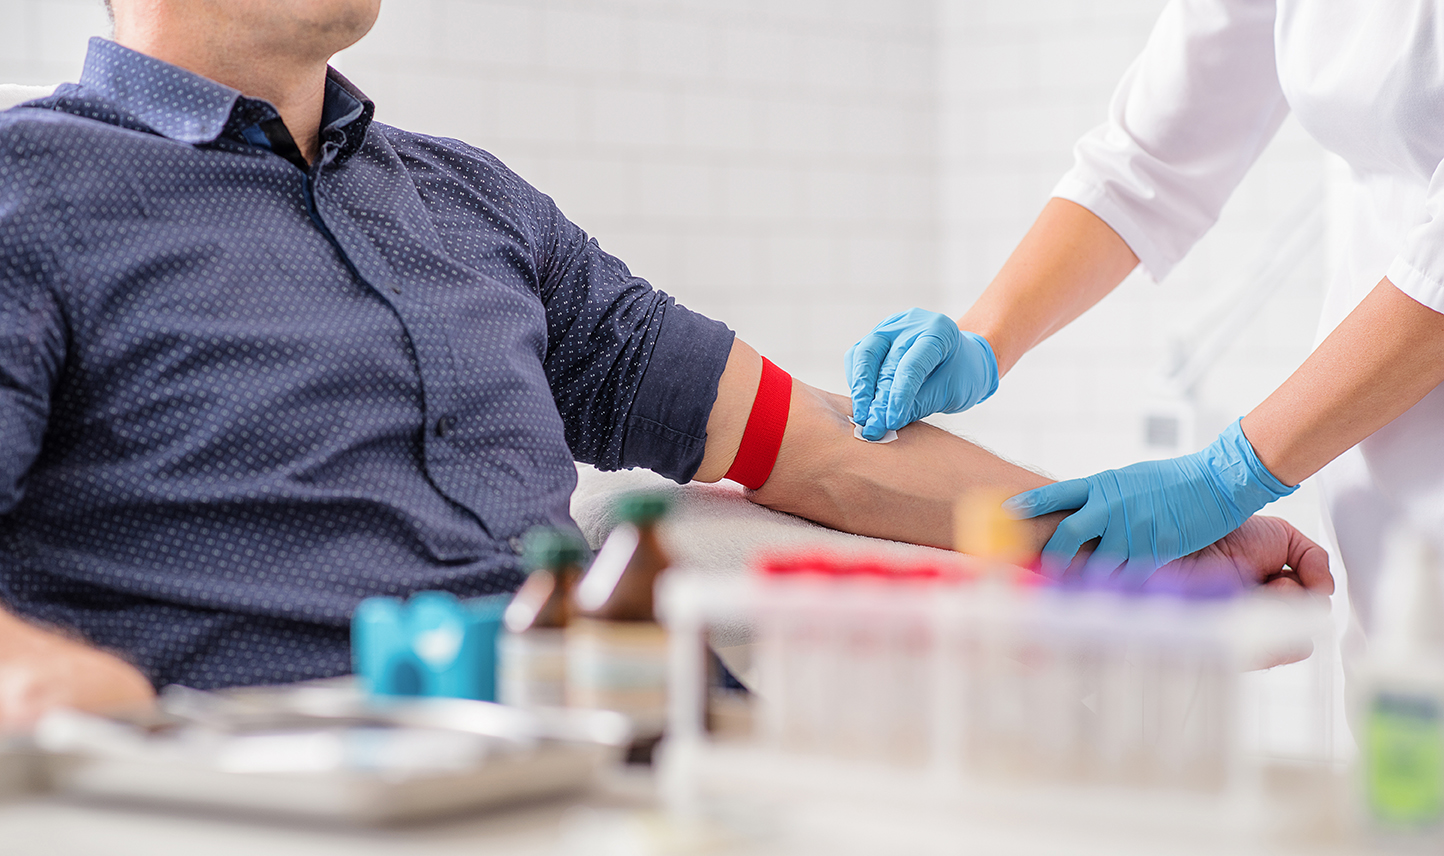 A man waits as a technician cleans his arm prior to a blood draw.